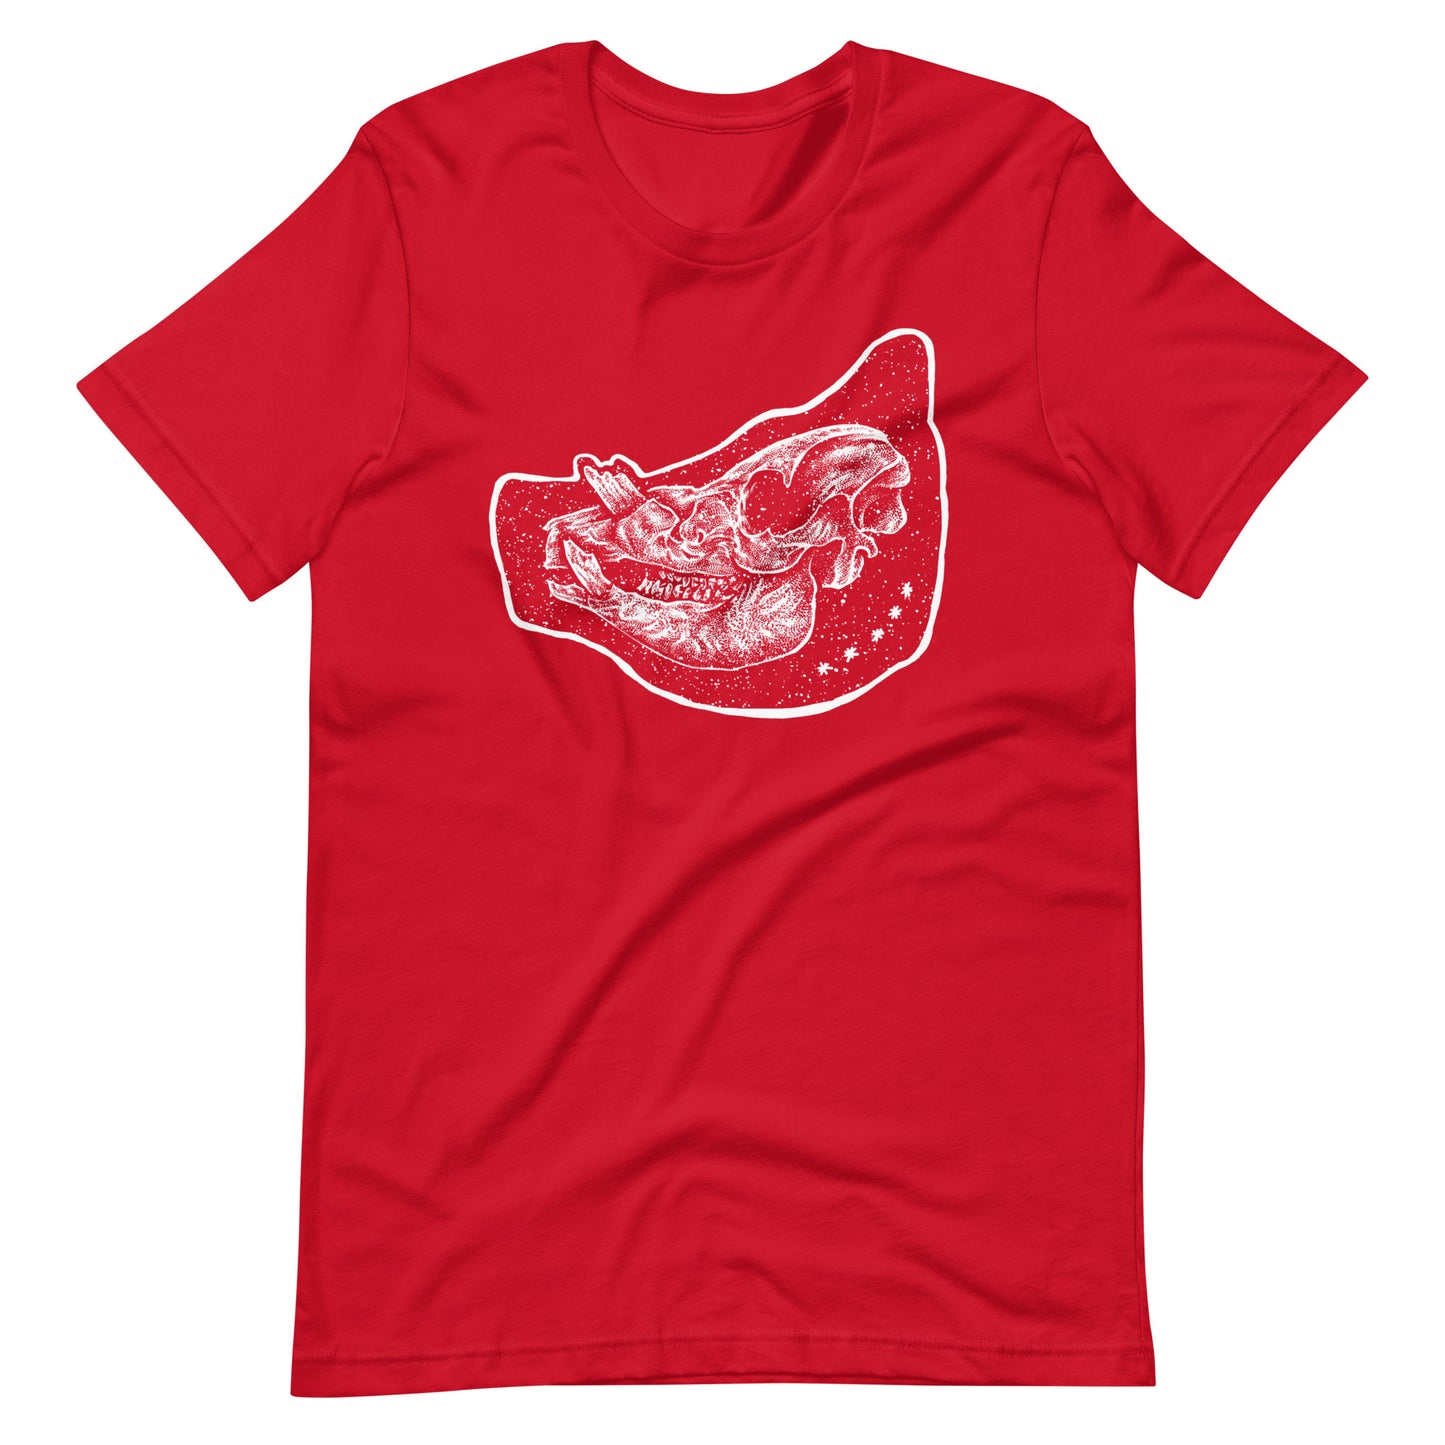 Pig White - Men's t-shirt - Red Front